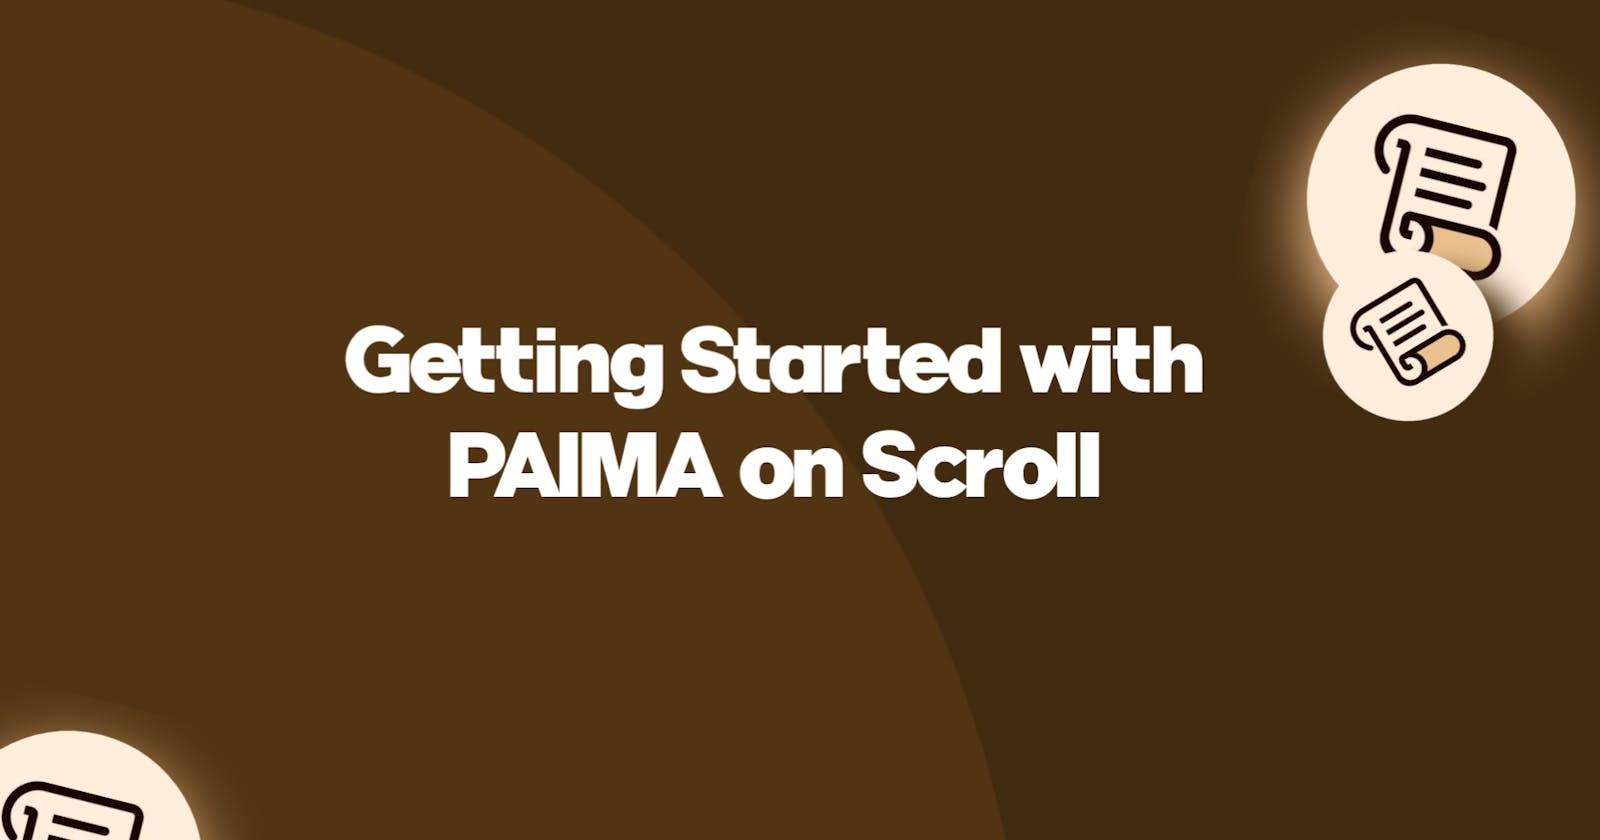 Getting Started with PAIMA and Scroll